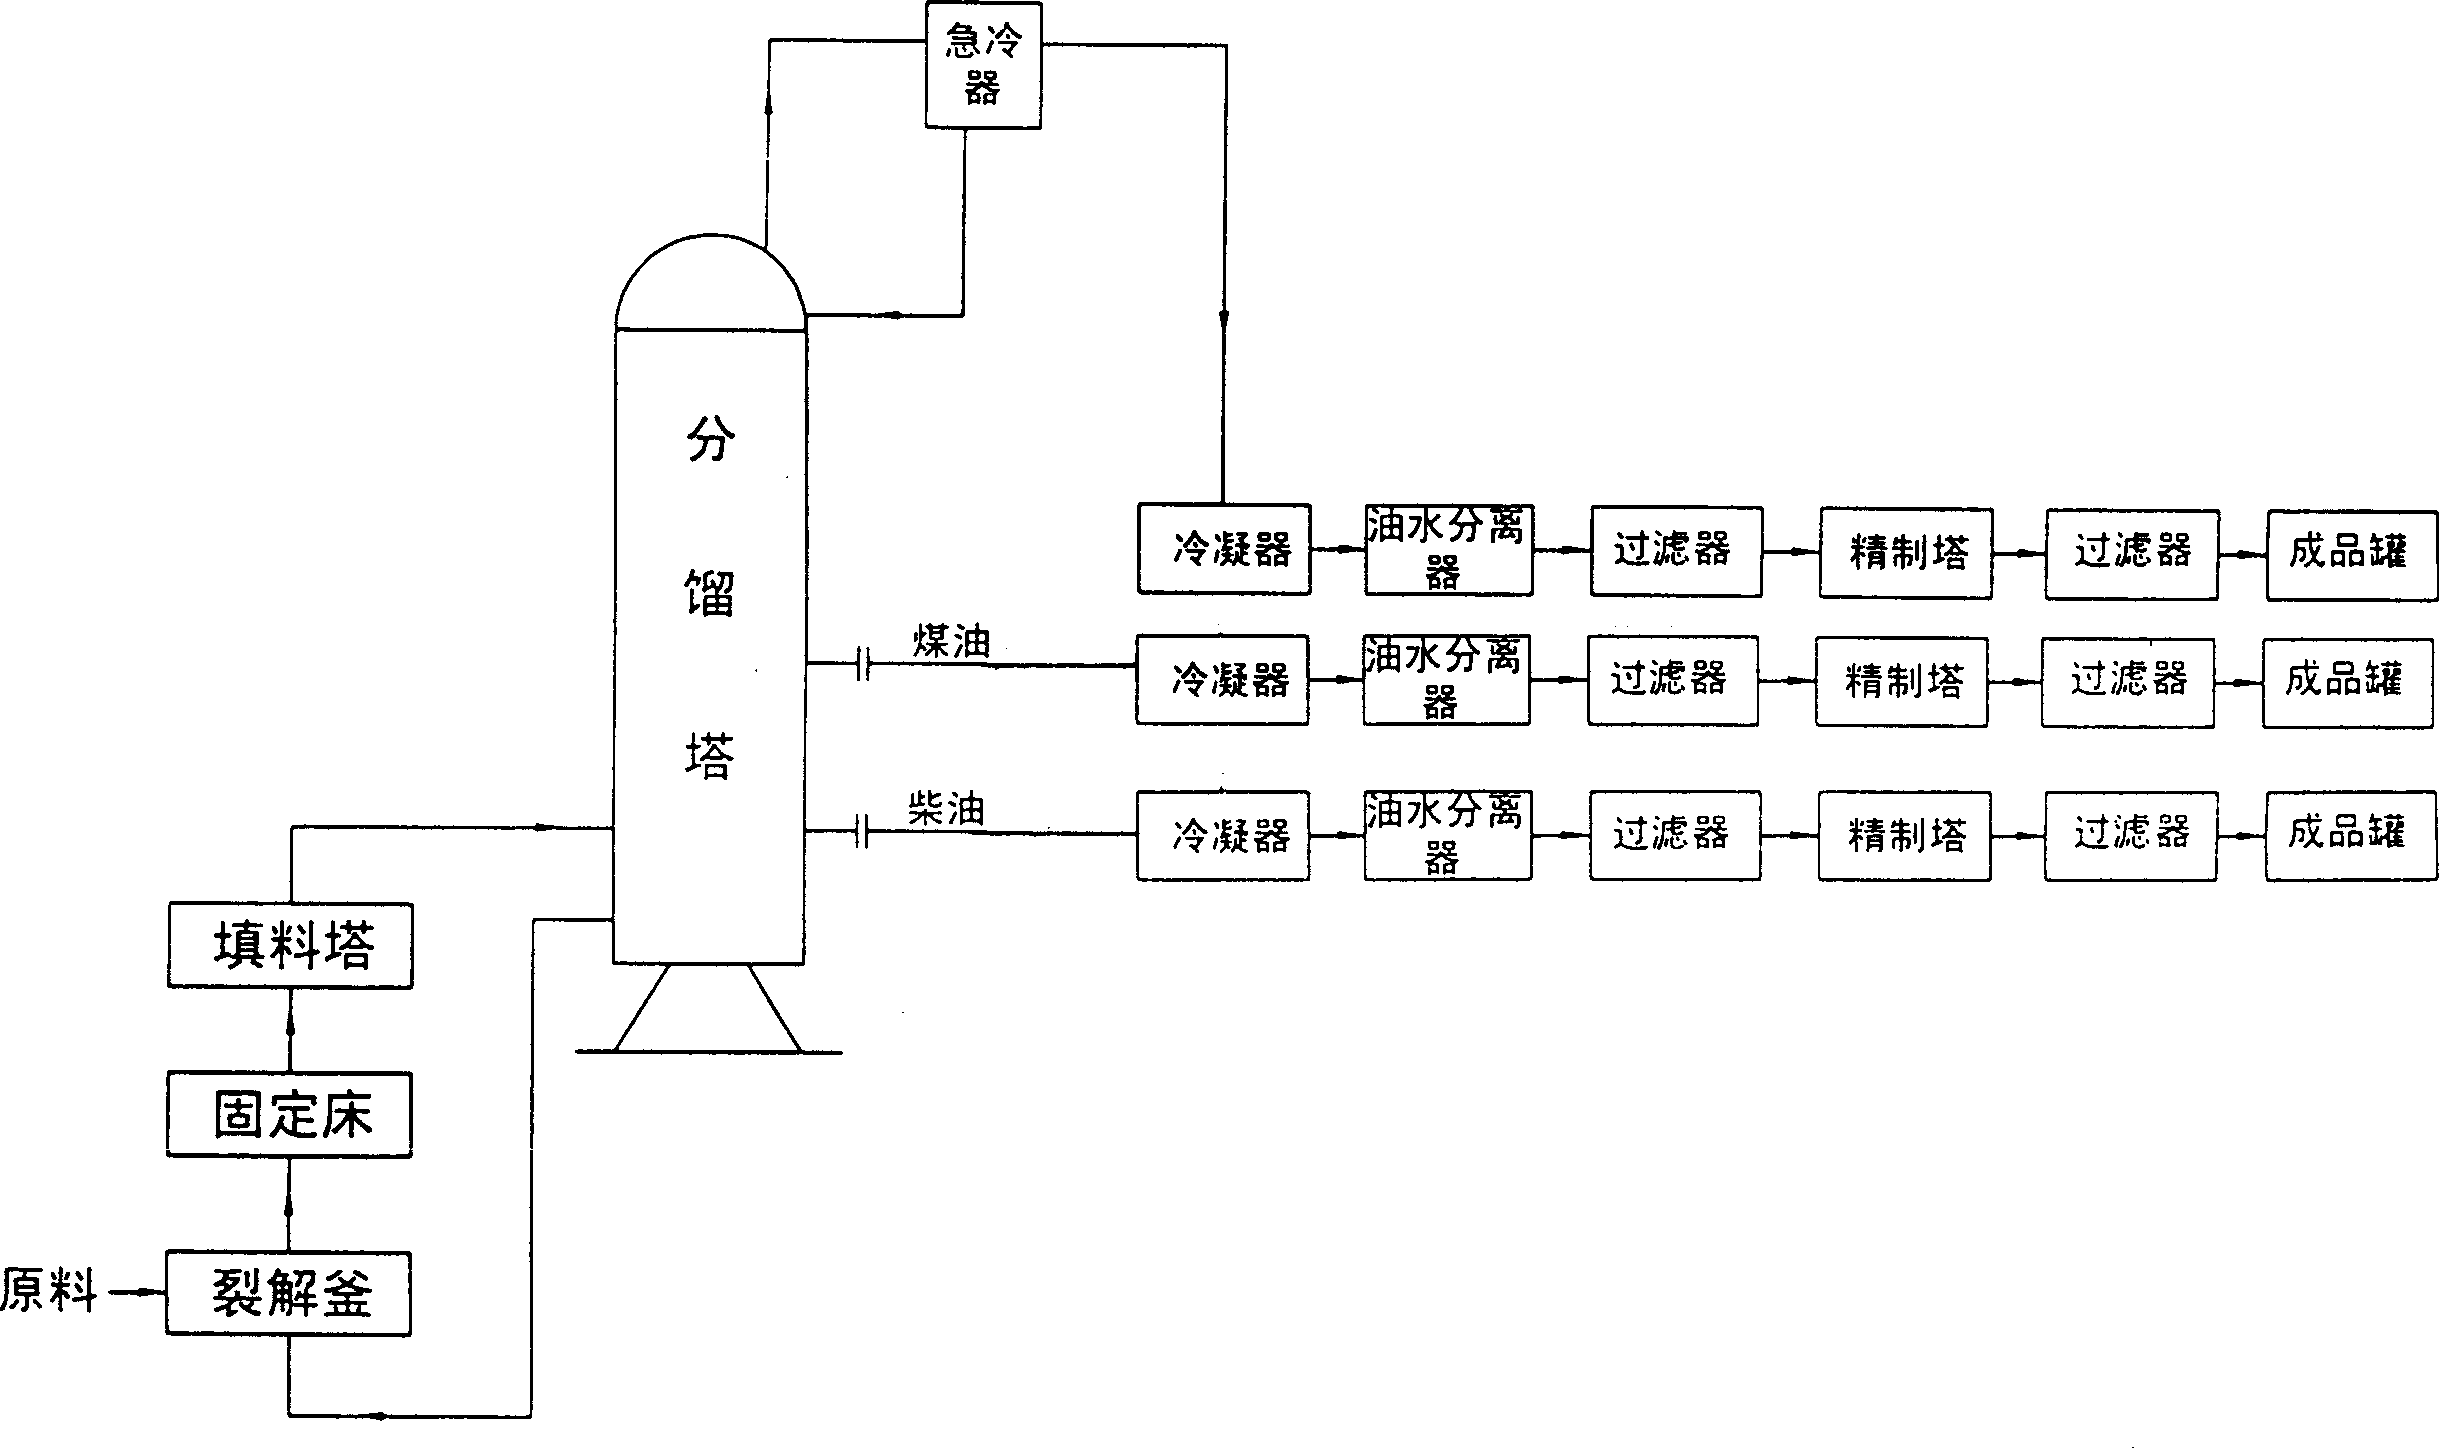 Method and device for producing vapour, coal, diesel oil using waste plastic, rubber, machine oil